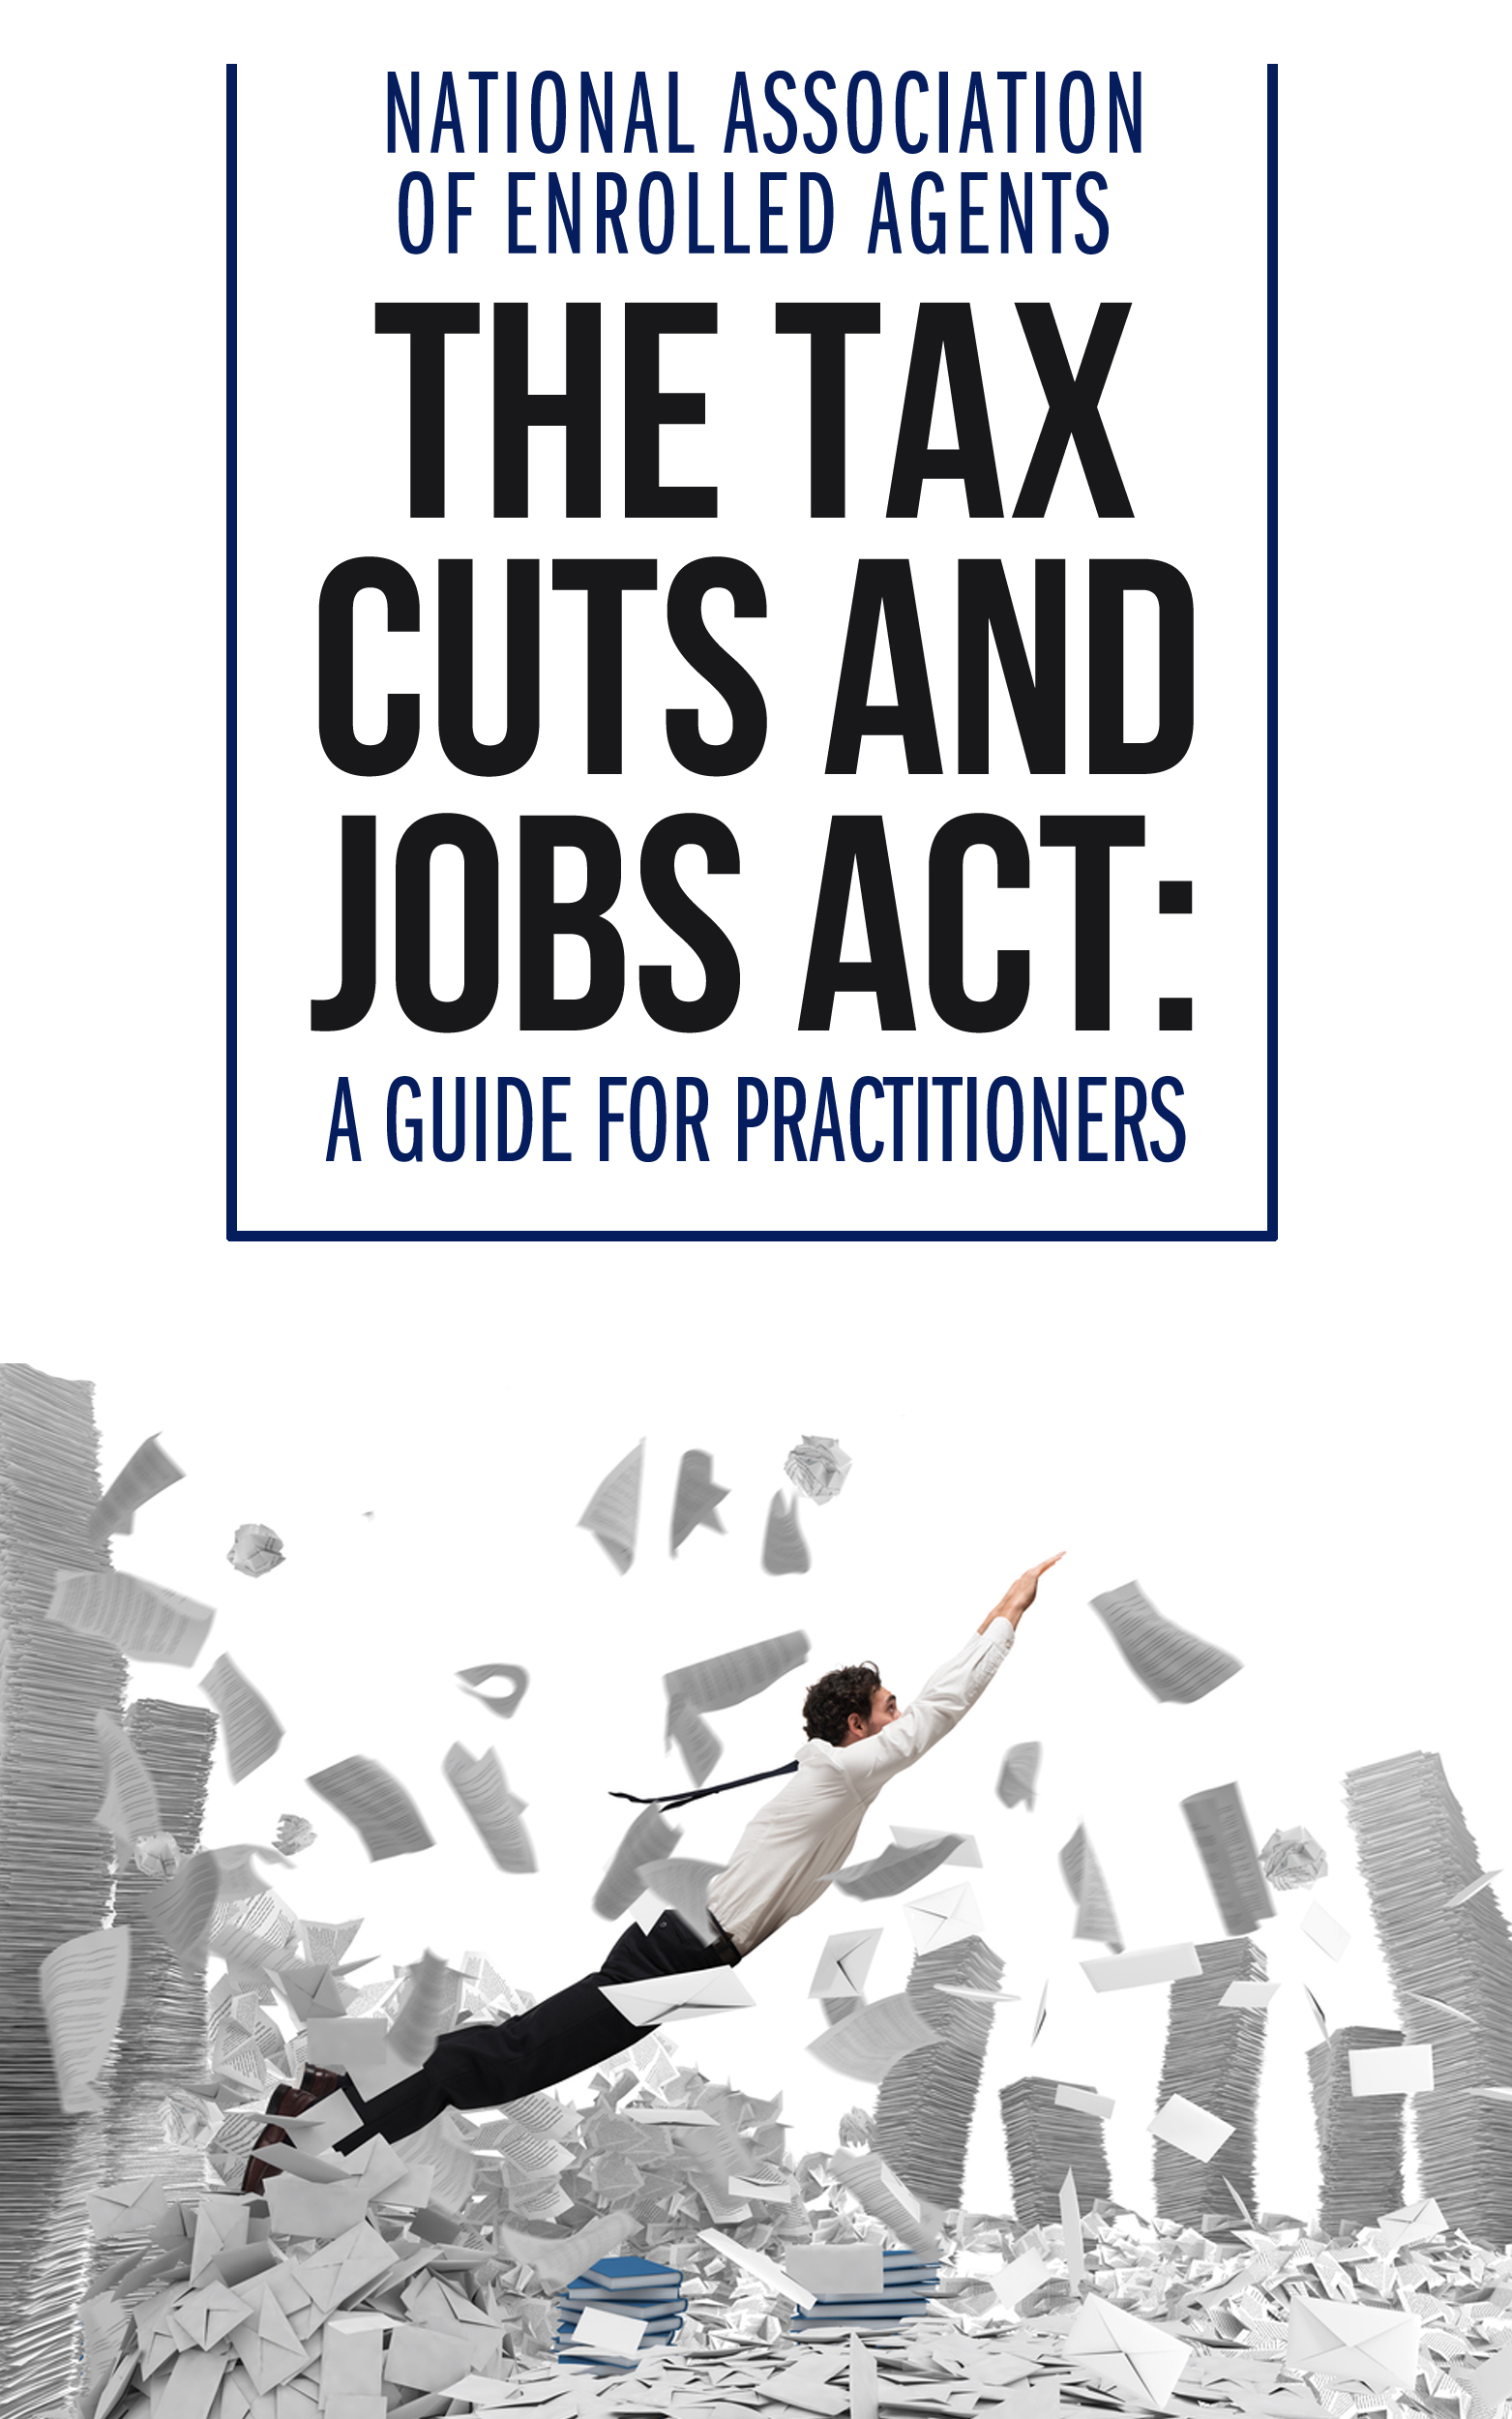 TCJA: A Guide for Practitioners